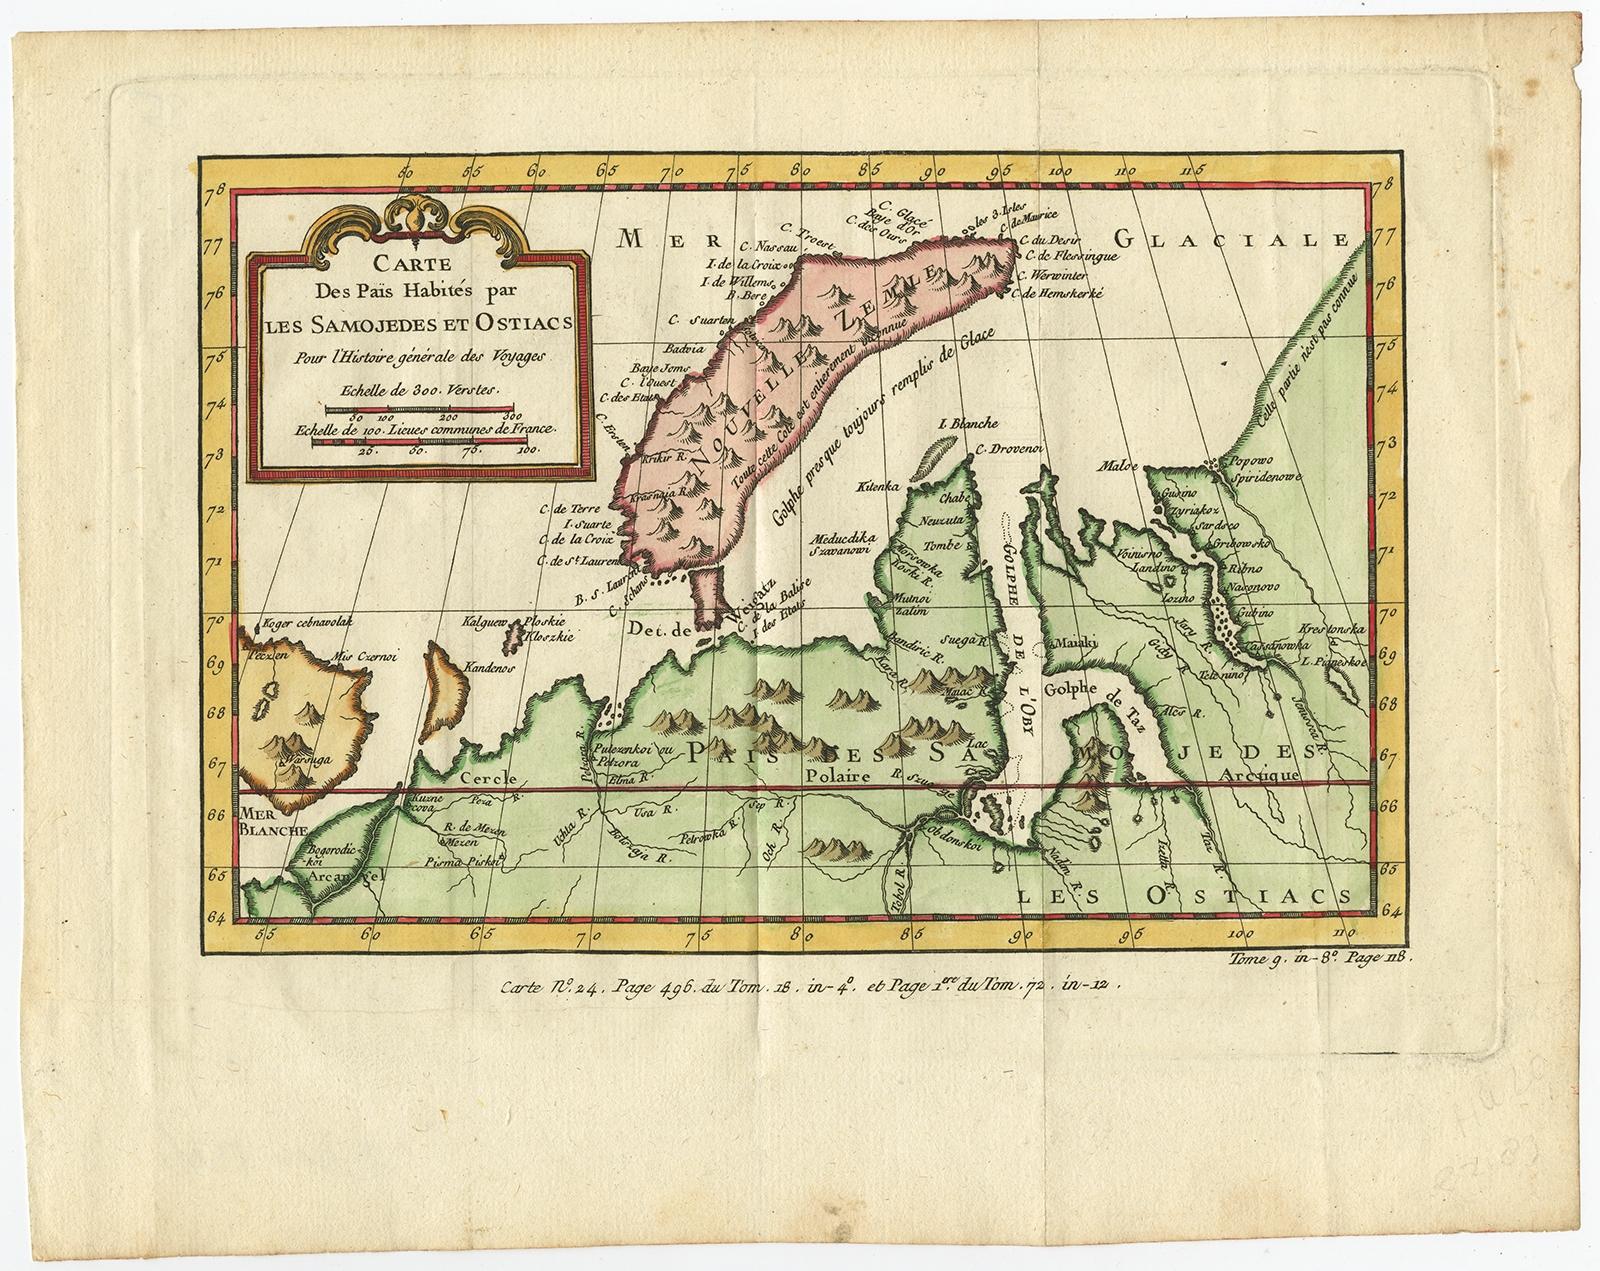 Antique map titled 'Carte Des Pais Habites par les Samojedes et Ostiacs.' 

Map of Novaya Zemlya and the Russian mainland. Source unknown, to be determined.

Artists and Engravers: Made by 'Nicolas Bellin' after an anonymous artist.